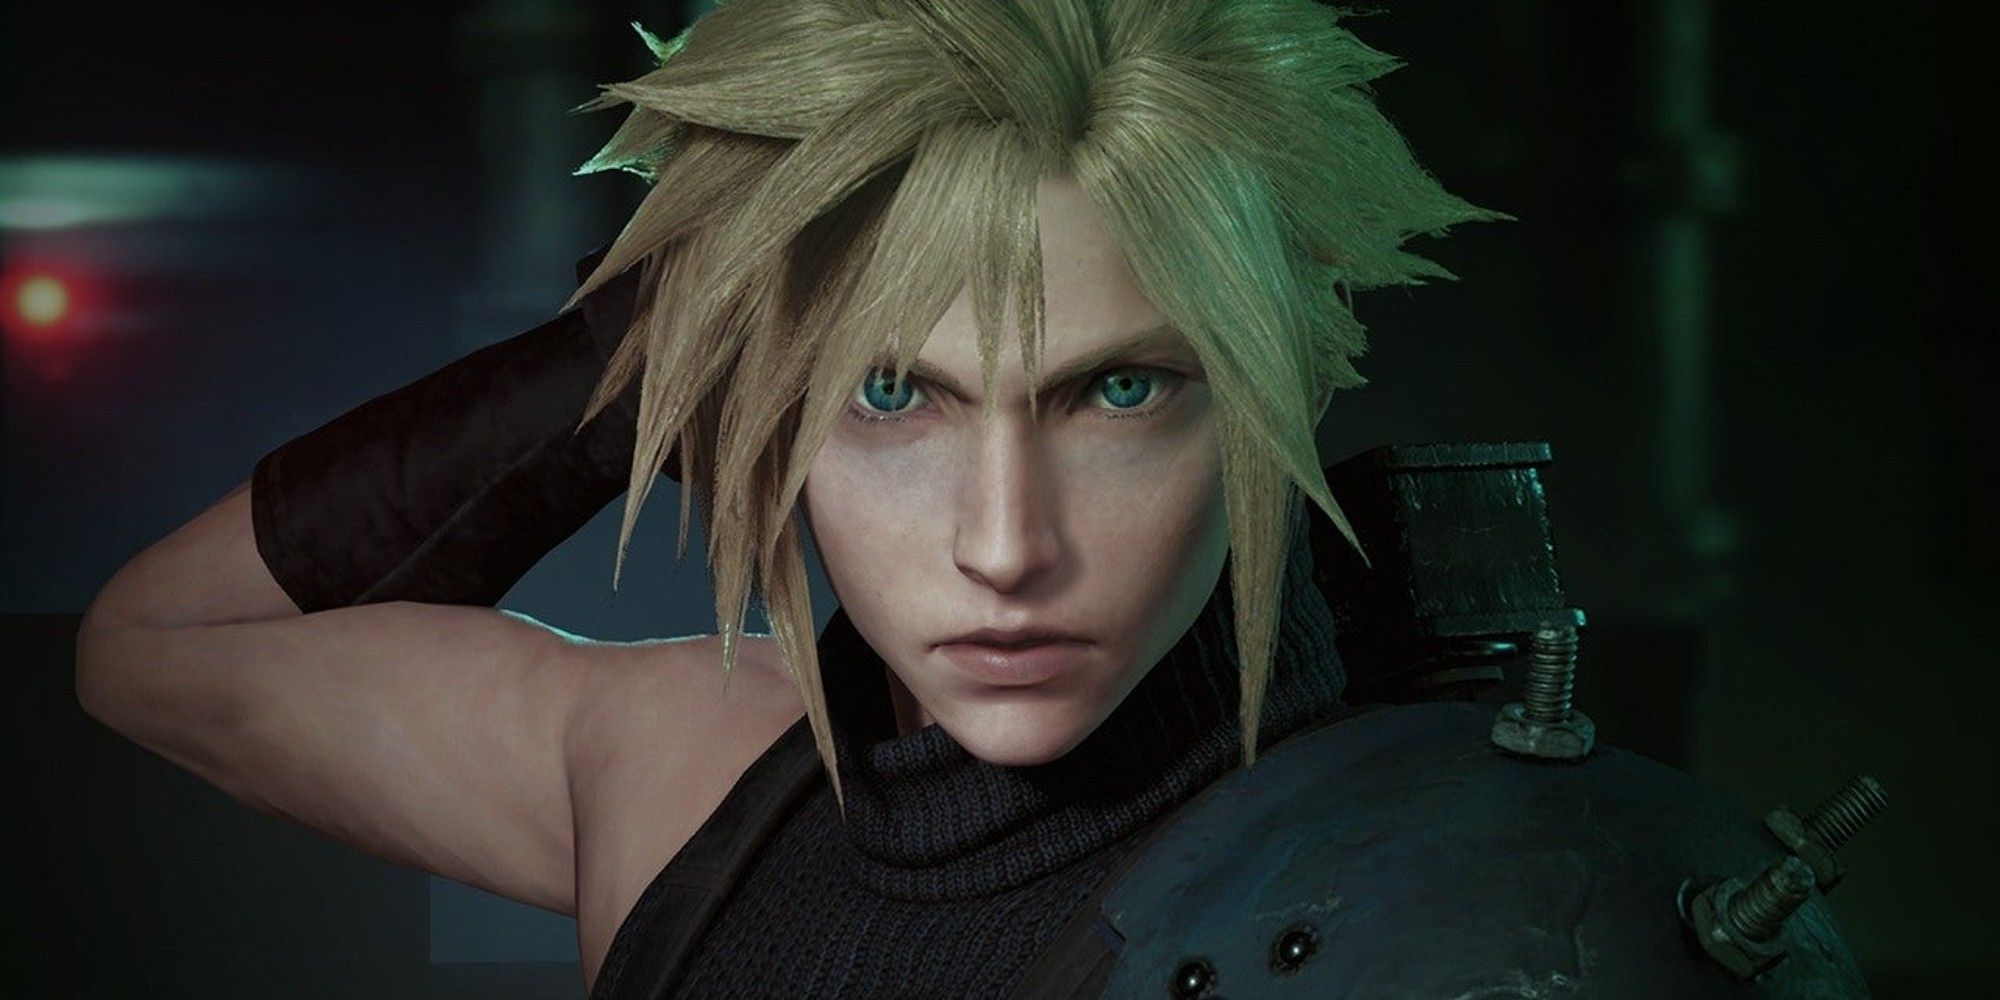 Cloud Strife holding his sword